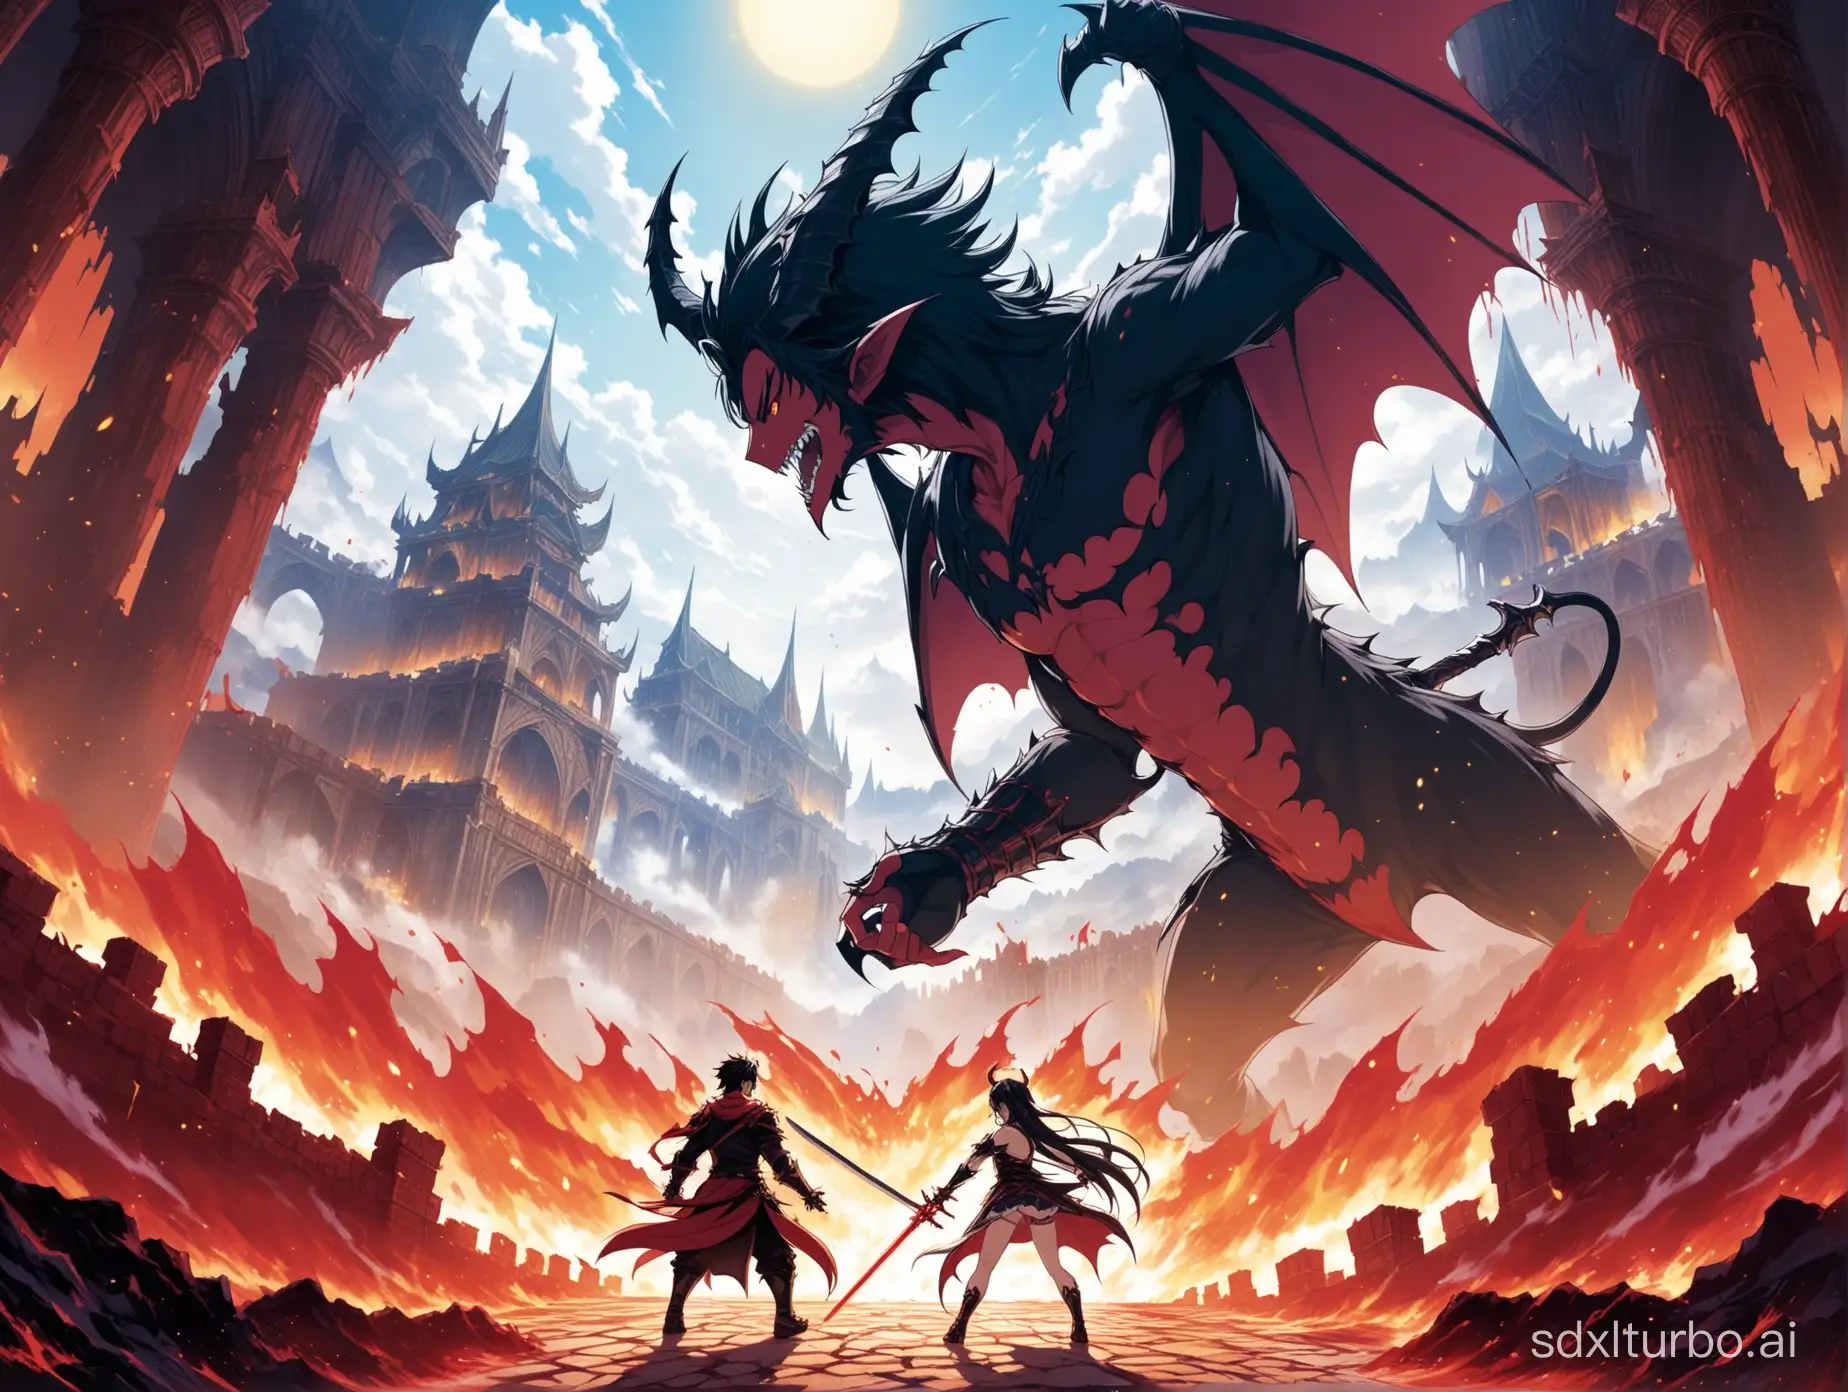 In a different world environment, the male protagonist battles the female demon king. The surroundings are the collapsed demon king's palace, and nearby the male protagonist are reliable teammates.